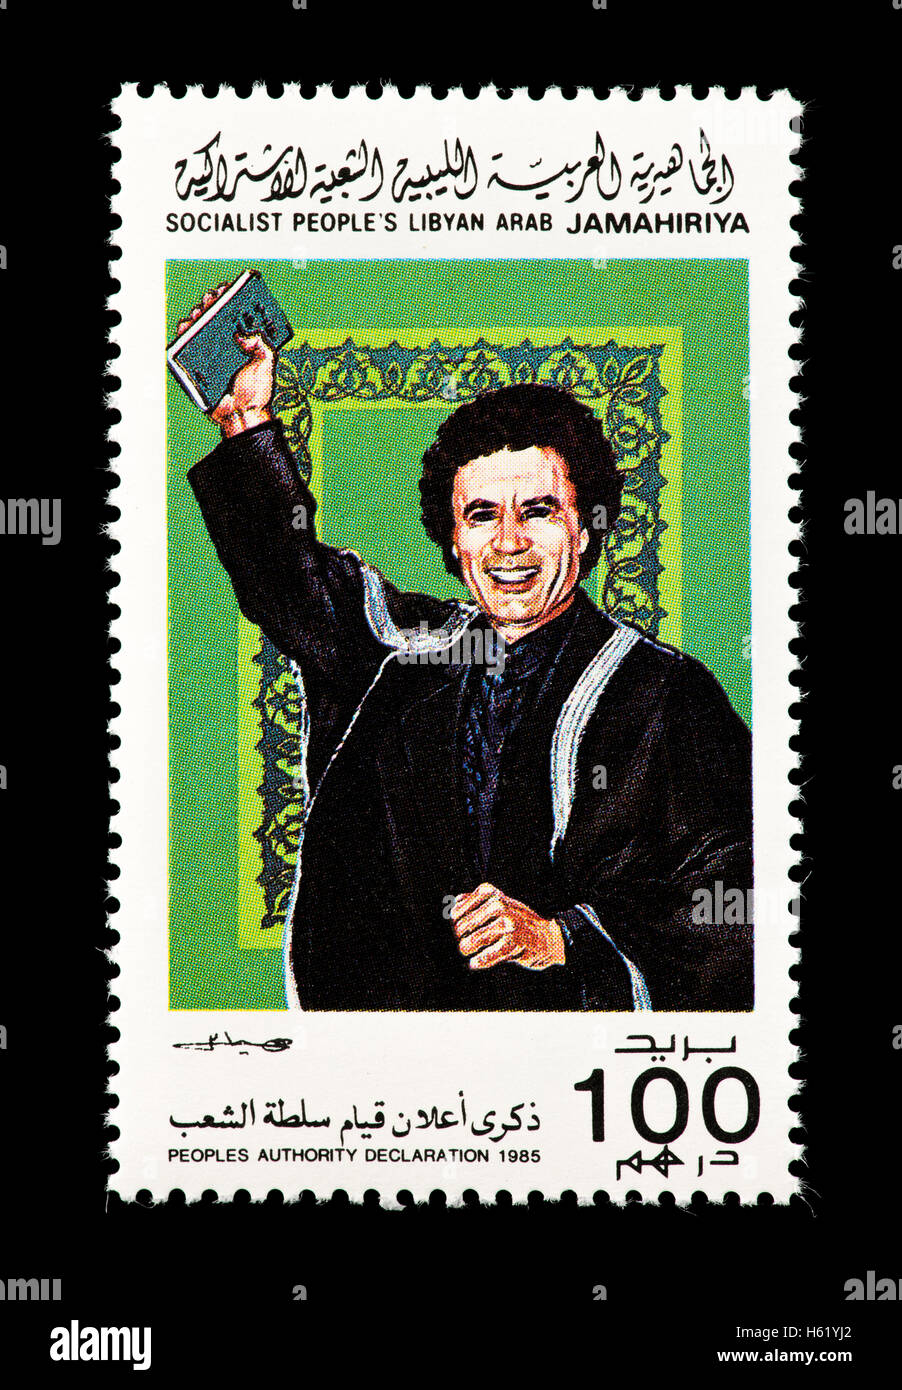 Postage stamp from Libya depicting Khadafy wearing a black robe. Stock Photo